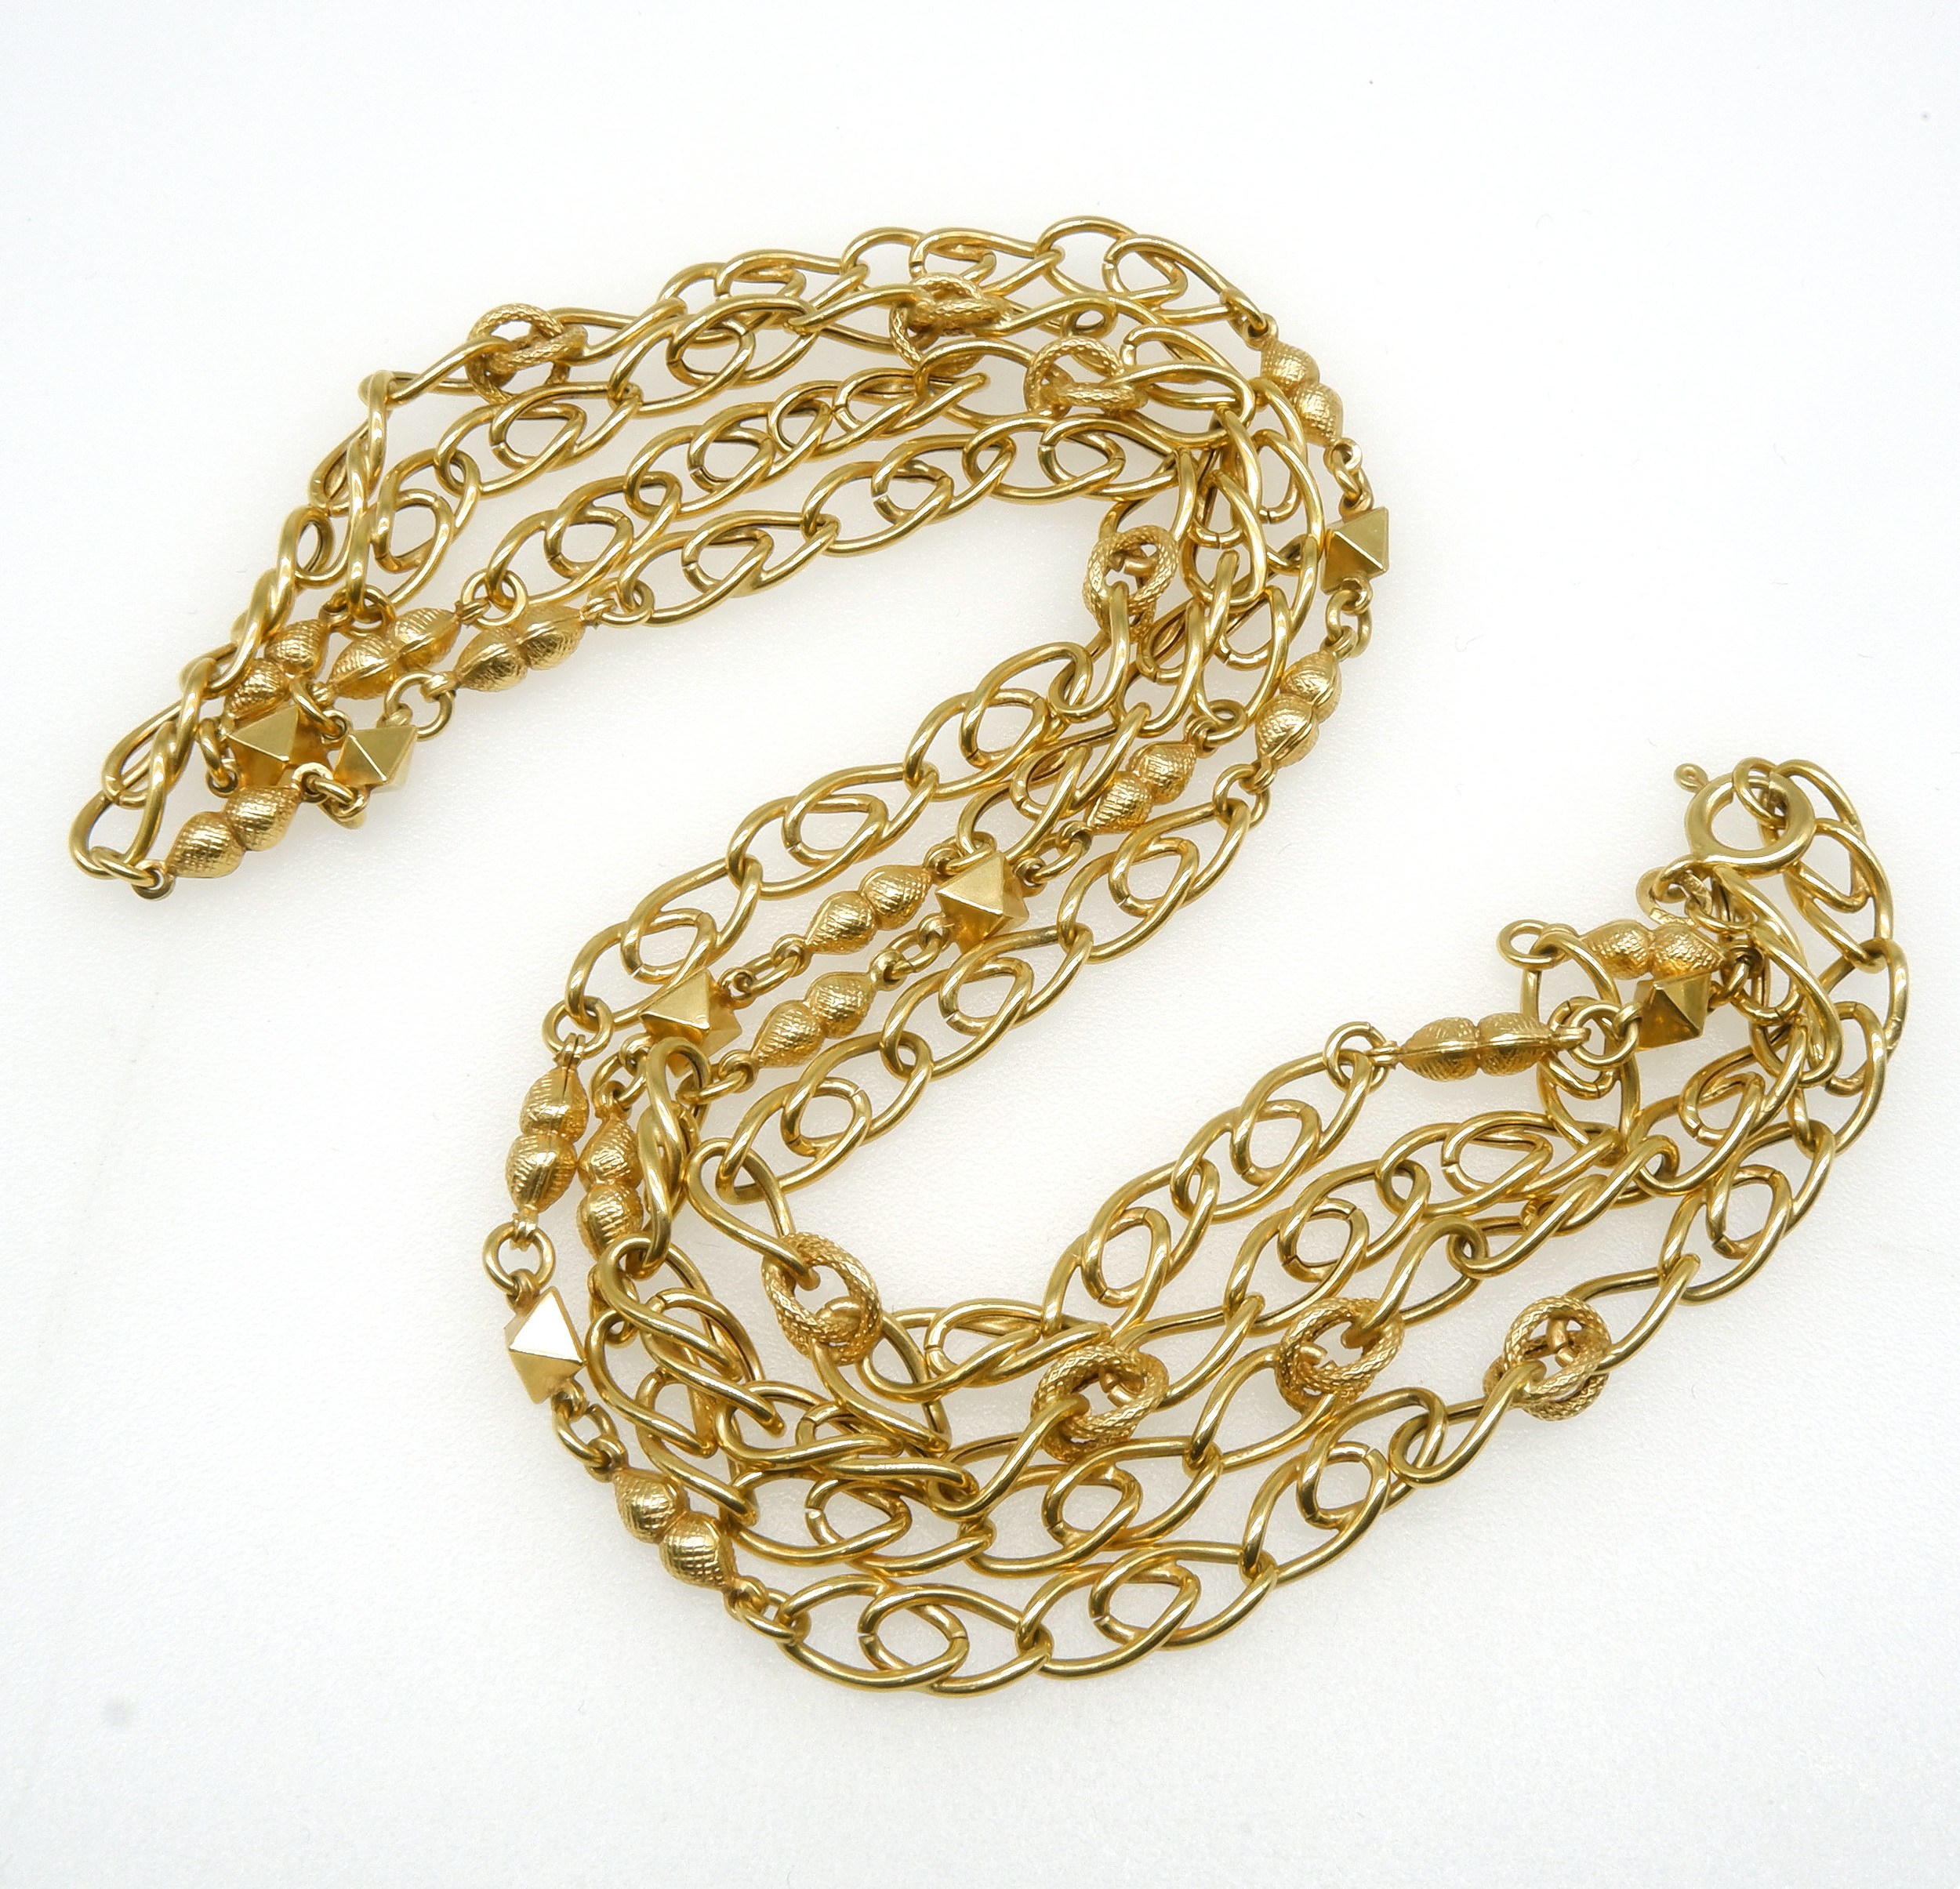 '18ct Yellow Gold Hollow Curb Link Chain, 39g'